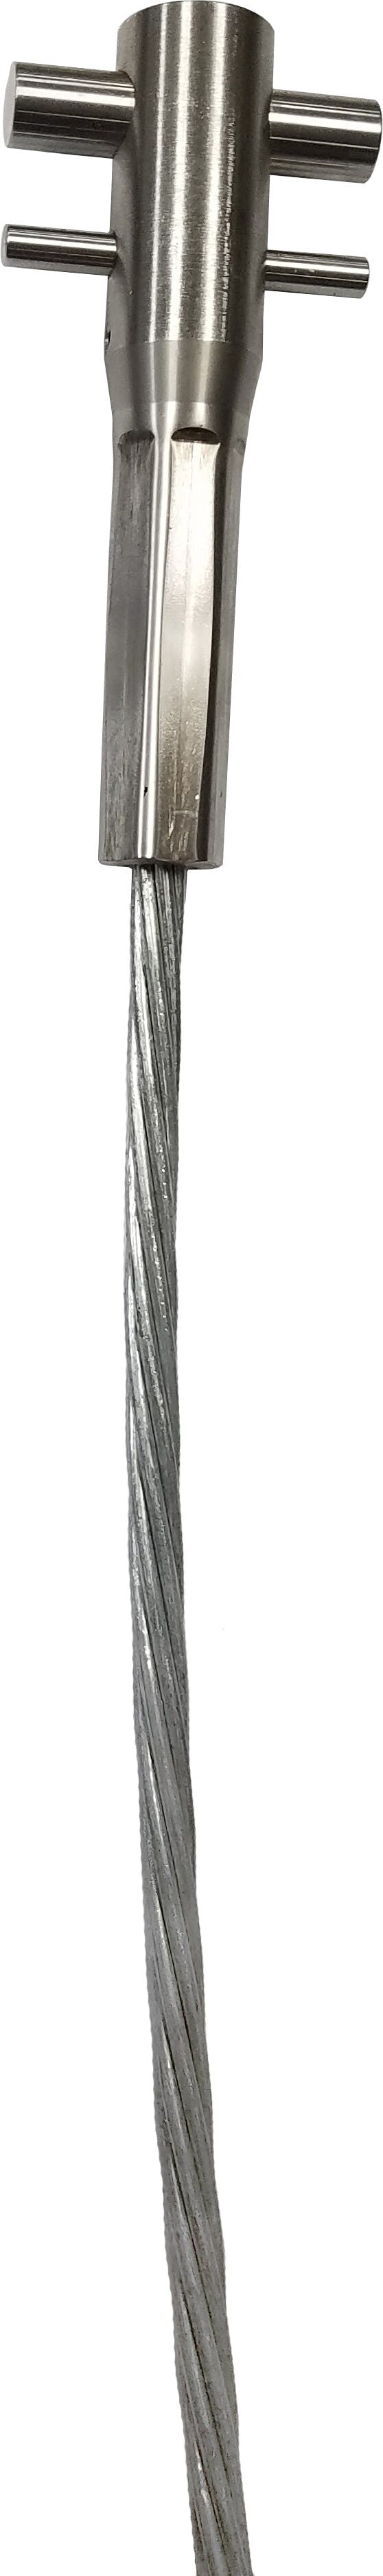 3M™ DBI-SALA® Lad-Saf™ Swaged Cable 6115032, 3/8 Inch, Stainless Steel, 25 m